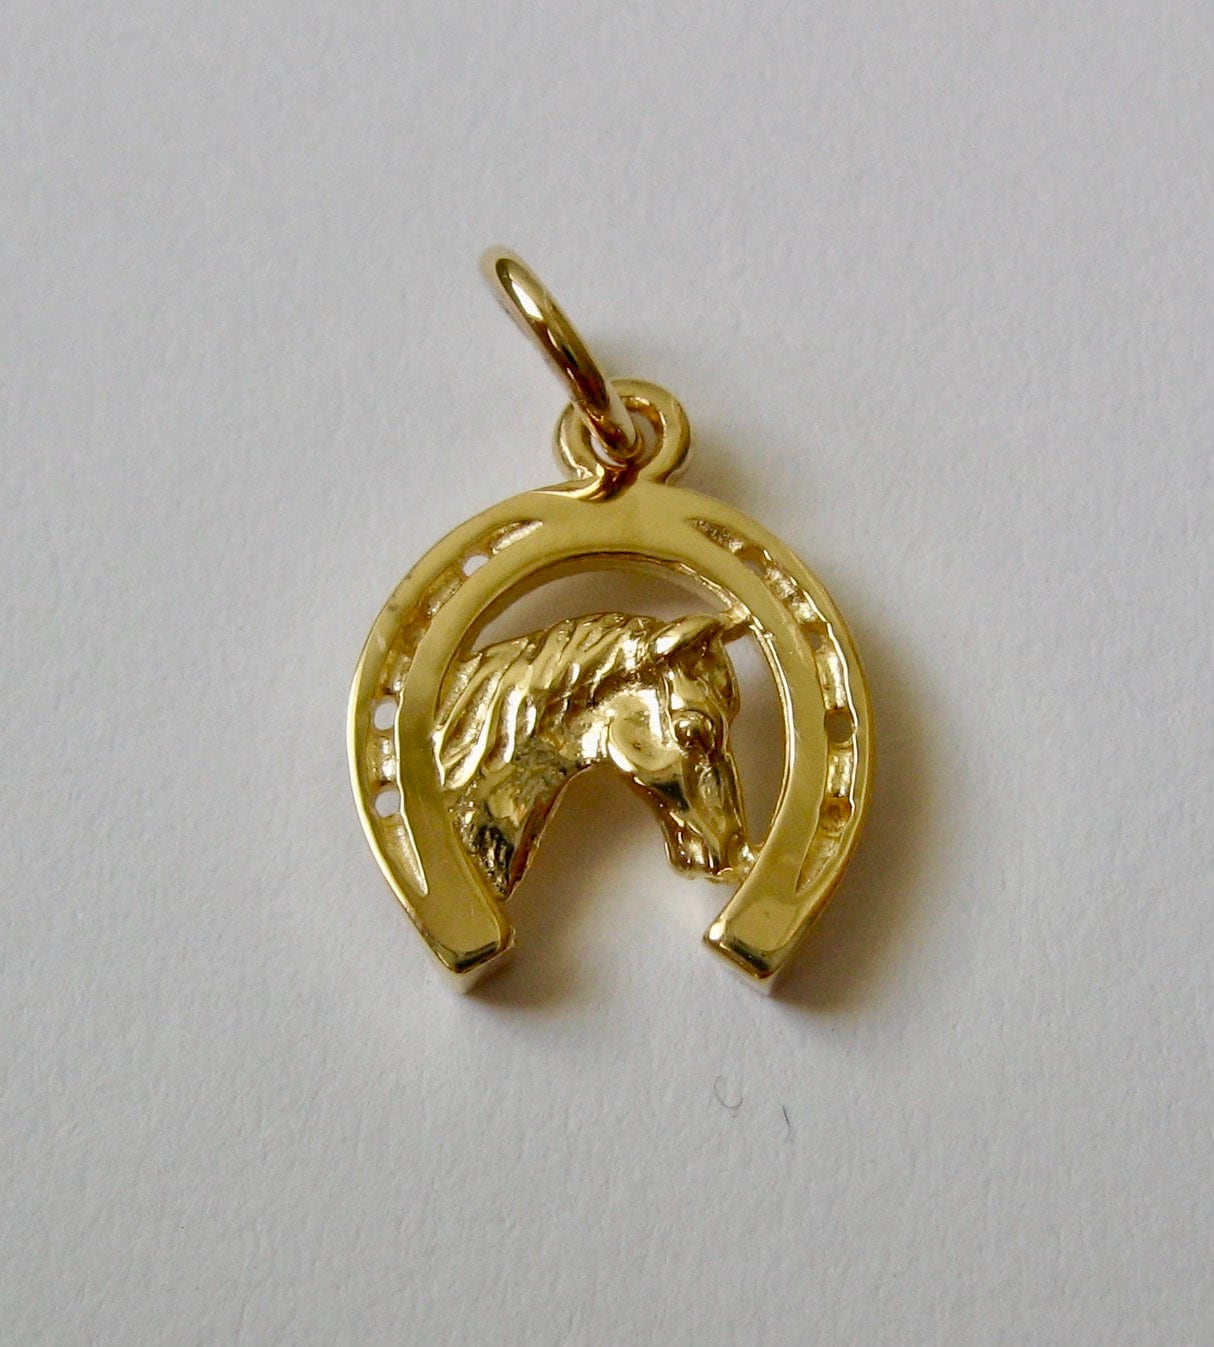 10pc horseshoe charm gold, good luck charms, lucky charms, horse